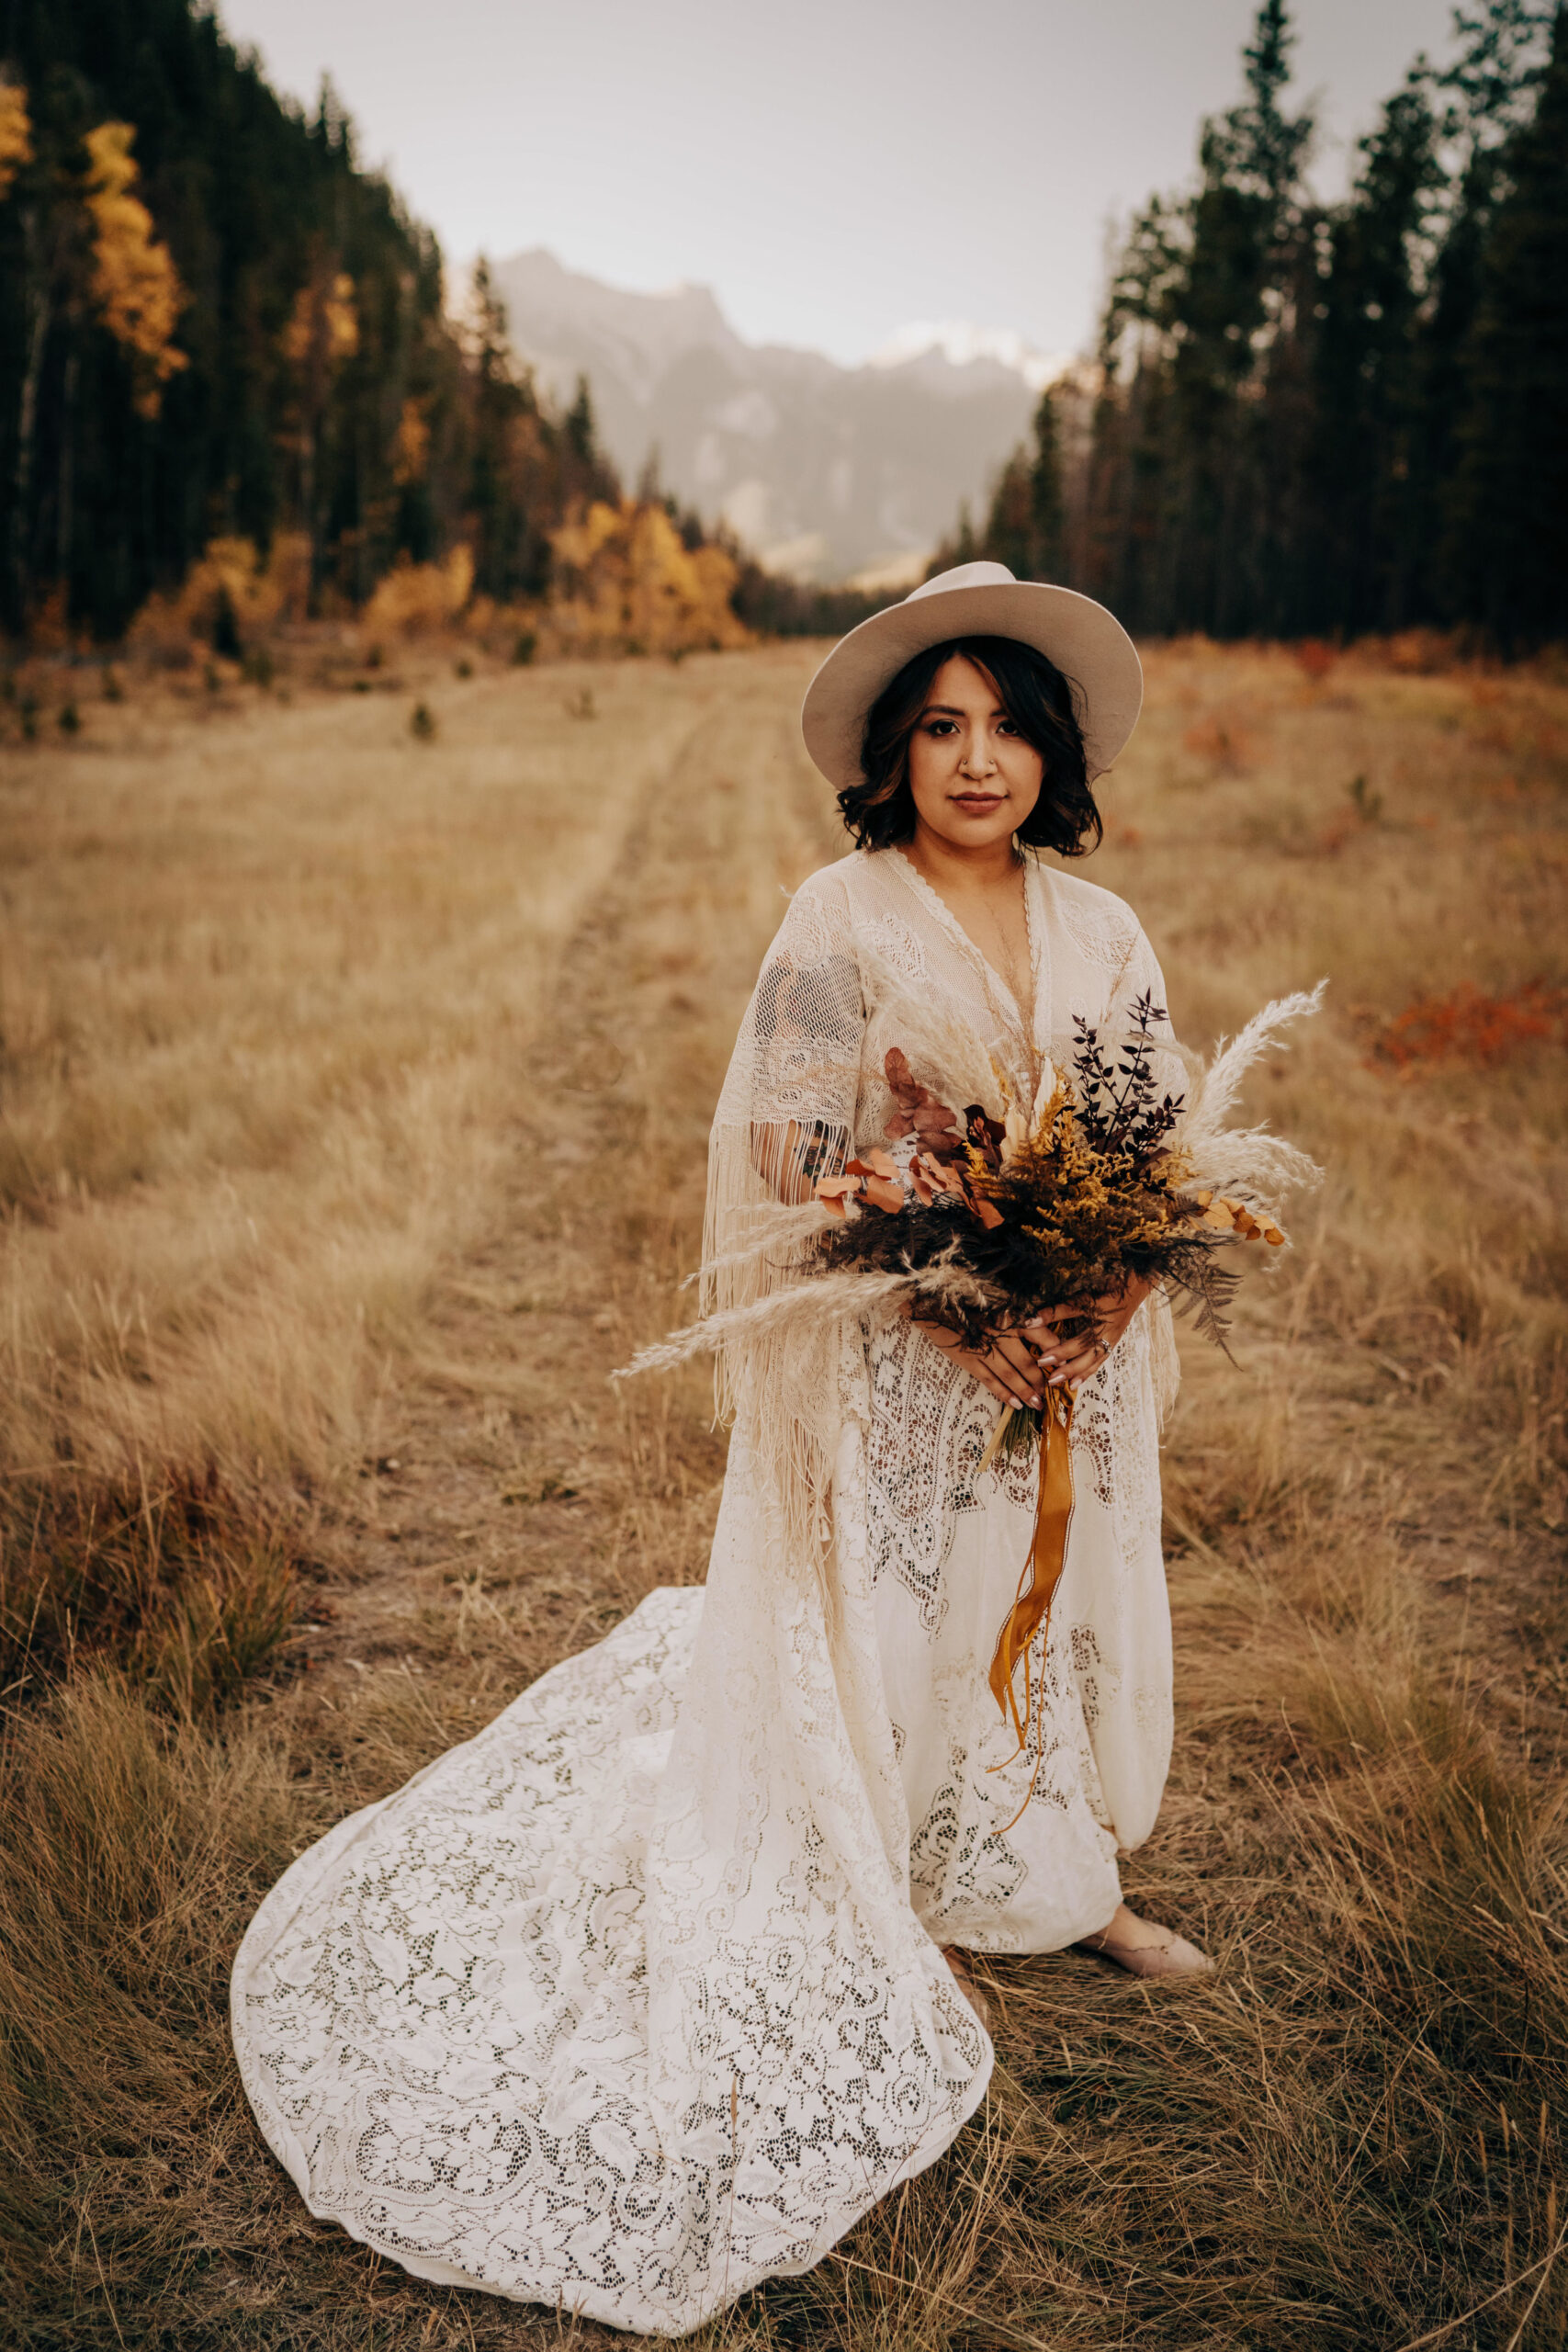 Boho bride in maternity lace wedding gown with hat holding bouquet of flowers in neutrals and browns